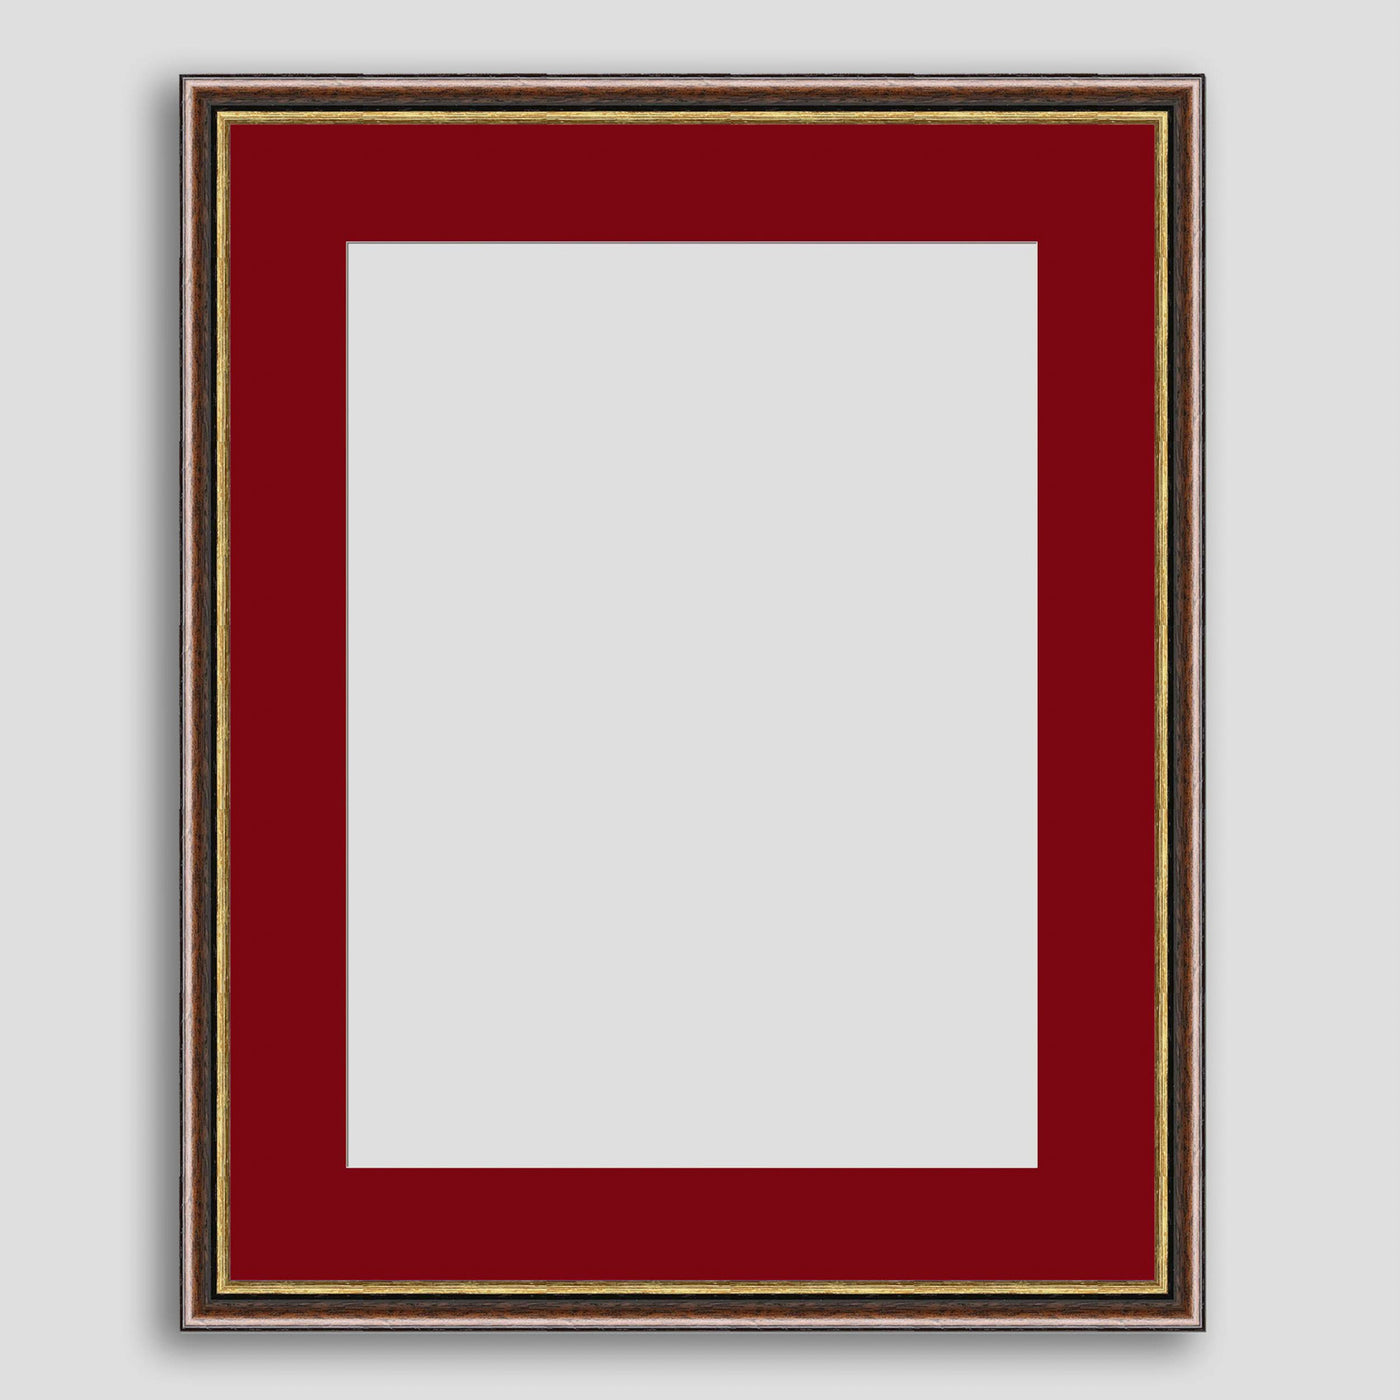 20x16 Brown & Gold Picture Frame with a 16x12 Mount